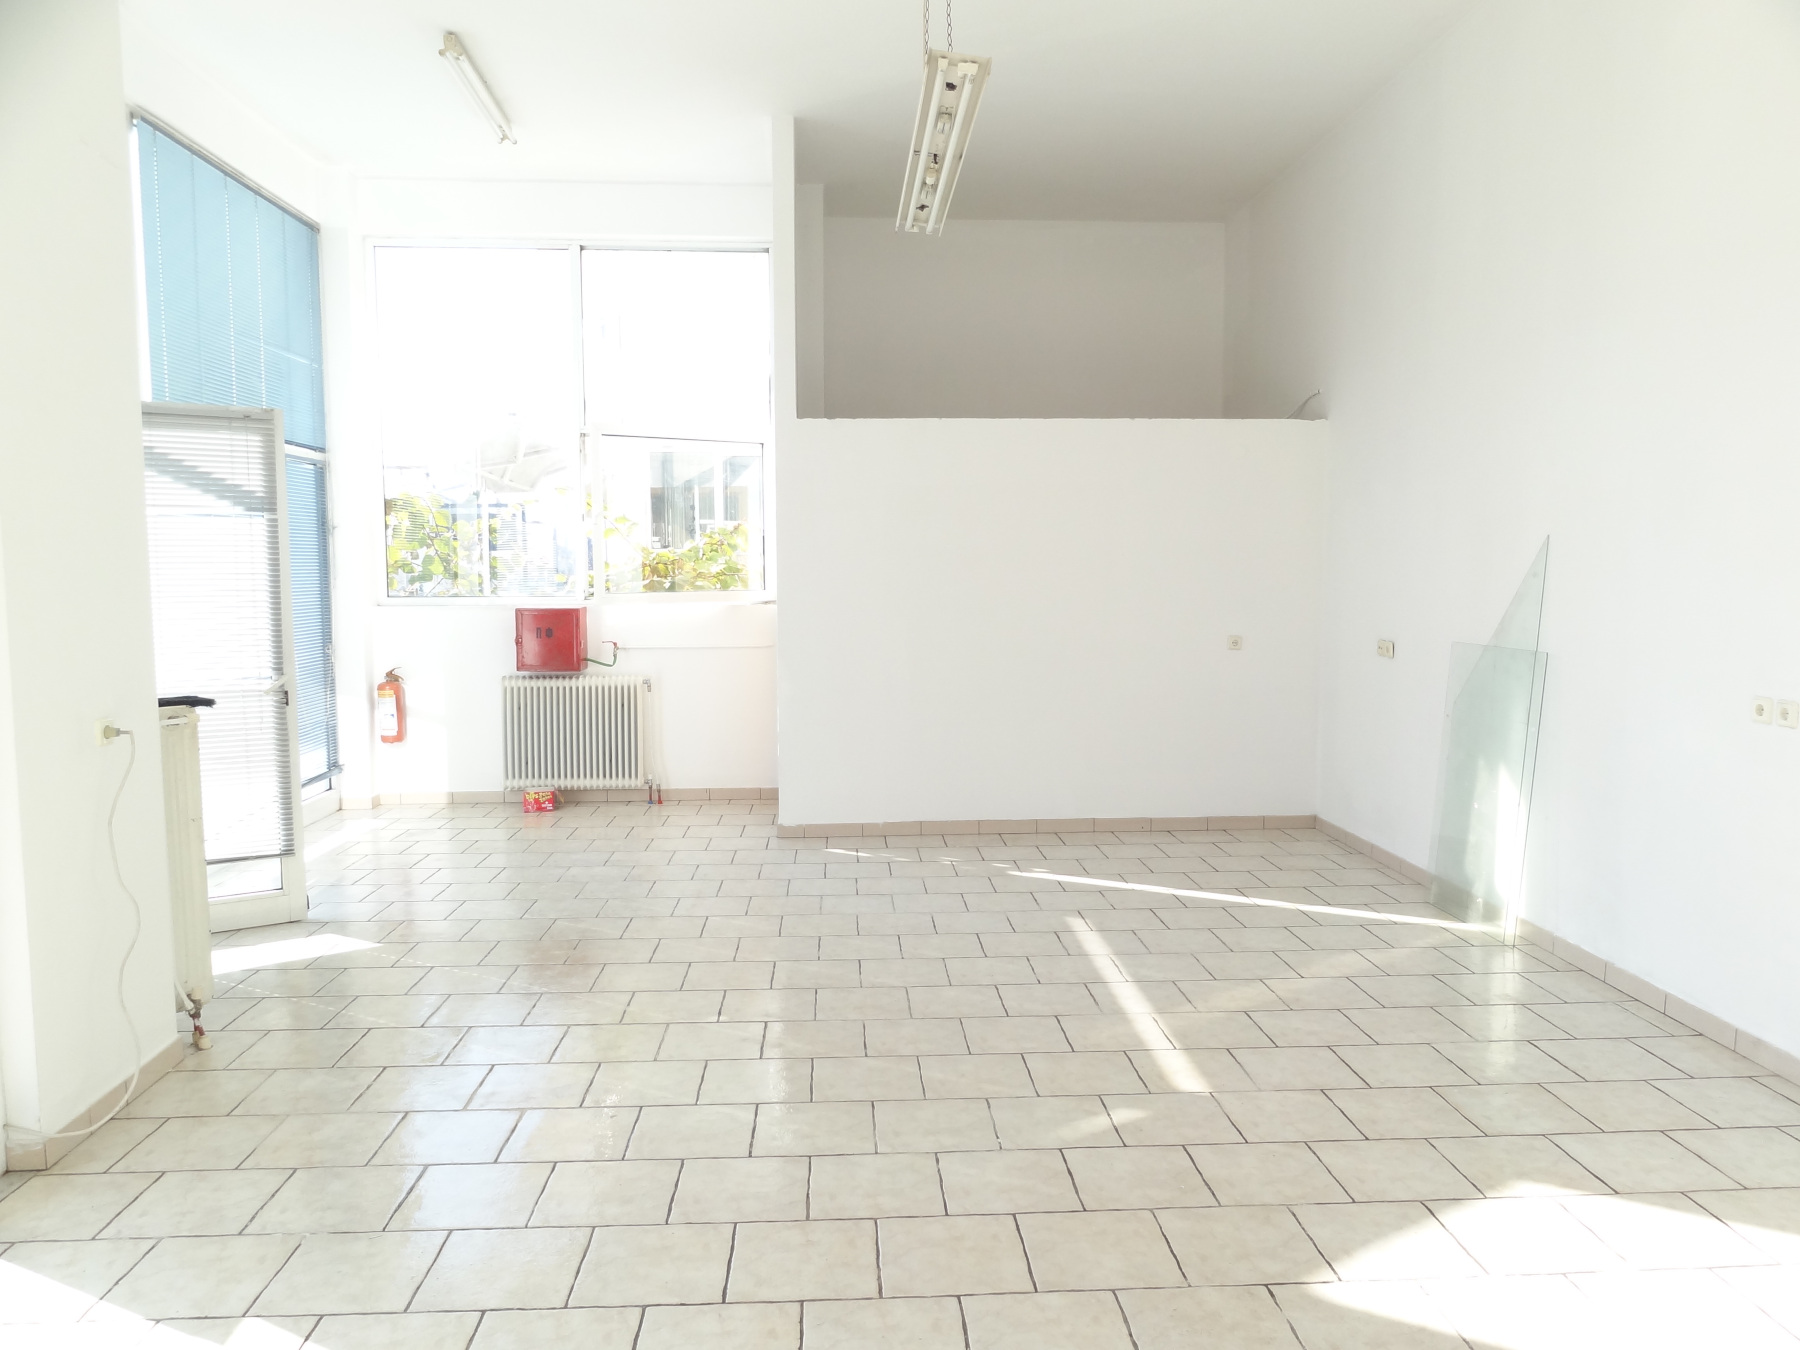 Commercial space for rent, 60 sq.m. in a central location in Kardamitsia of Ioannina with a parking space.